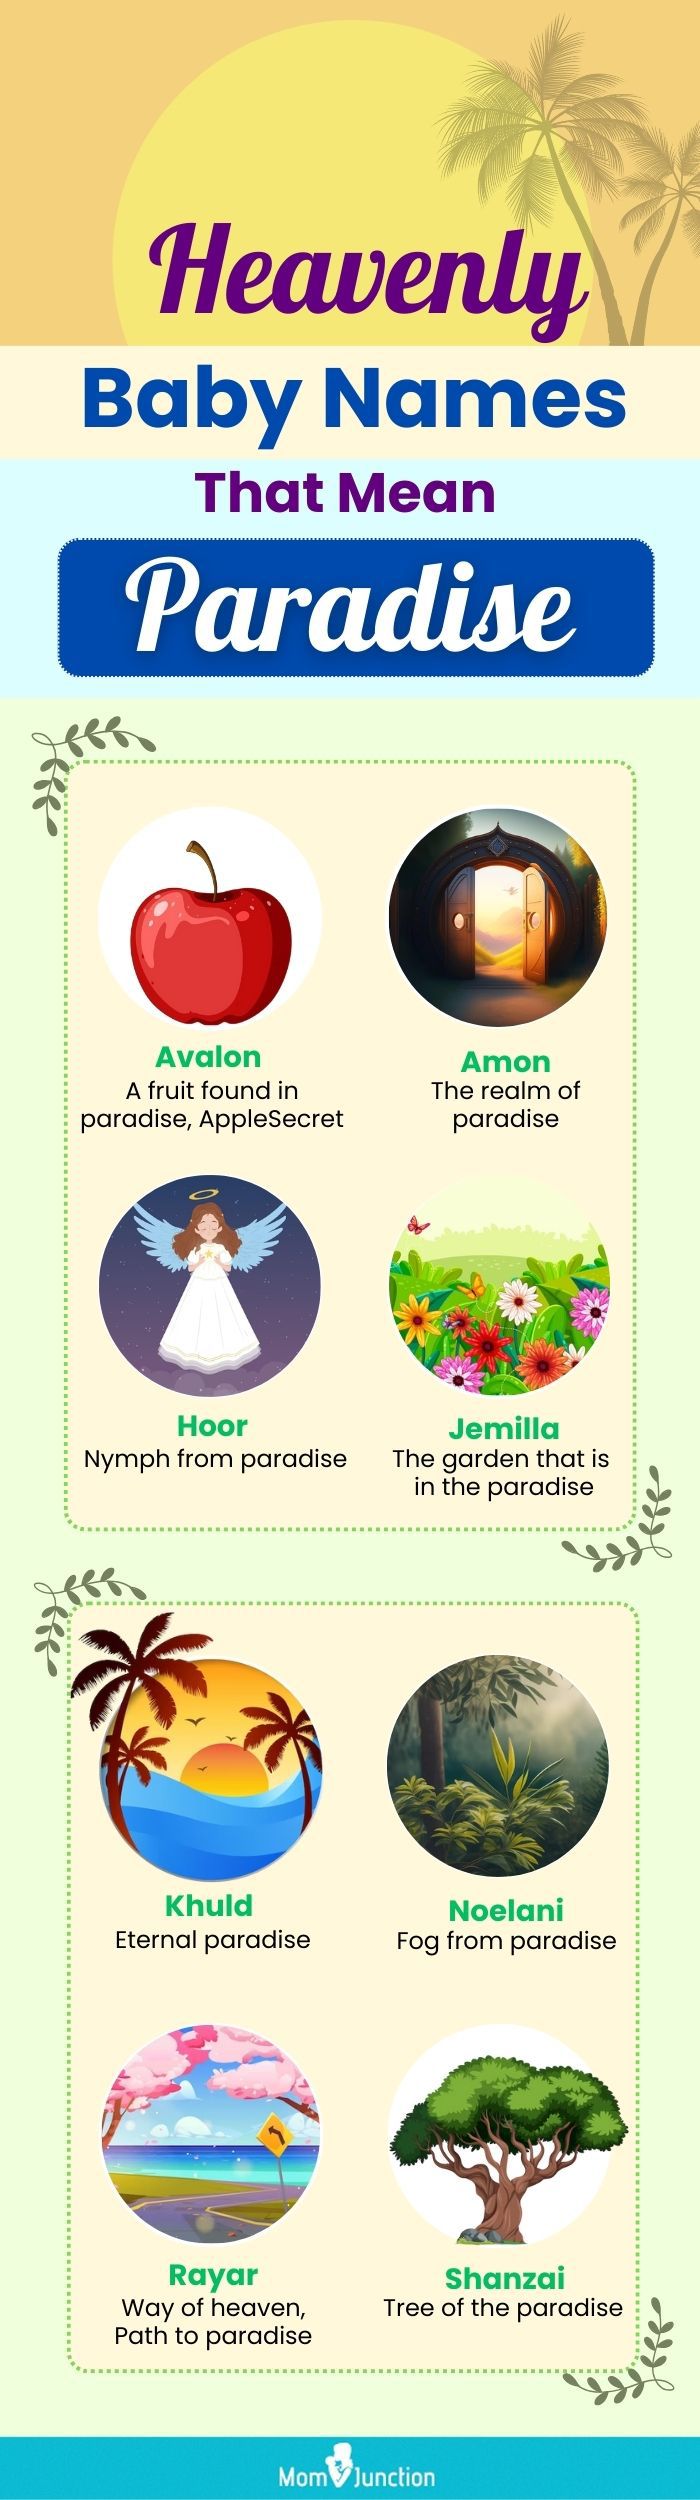 heavenly baby names that mean paradise (infographic)